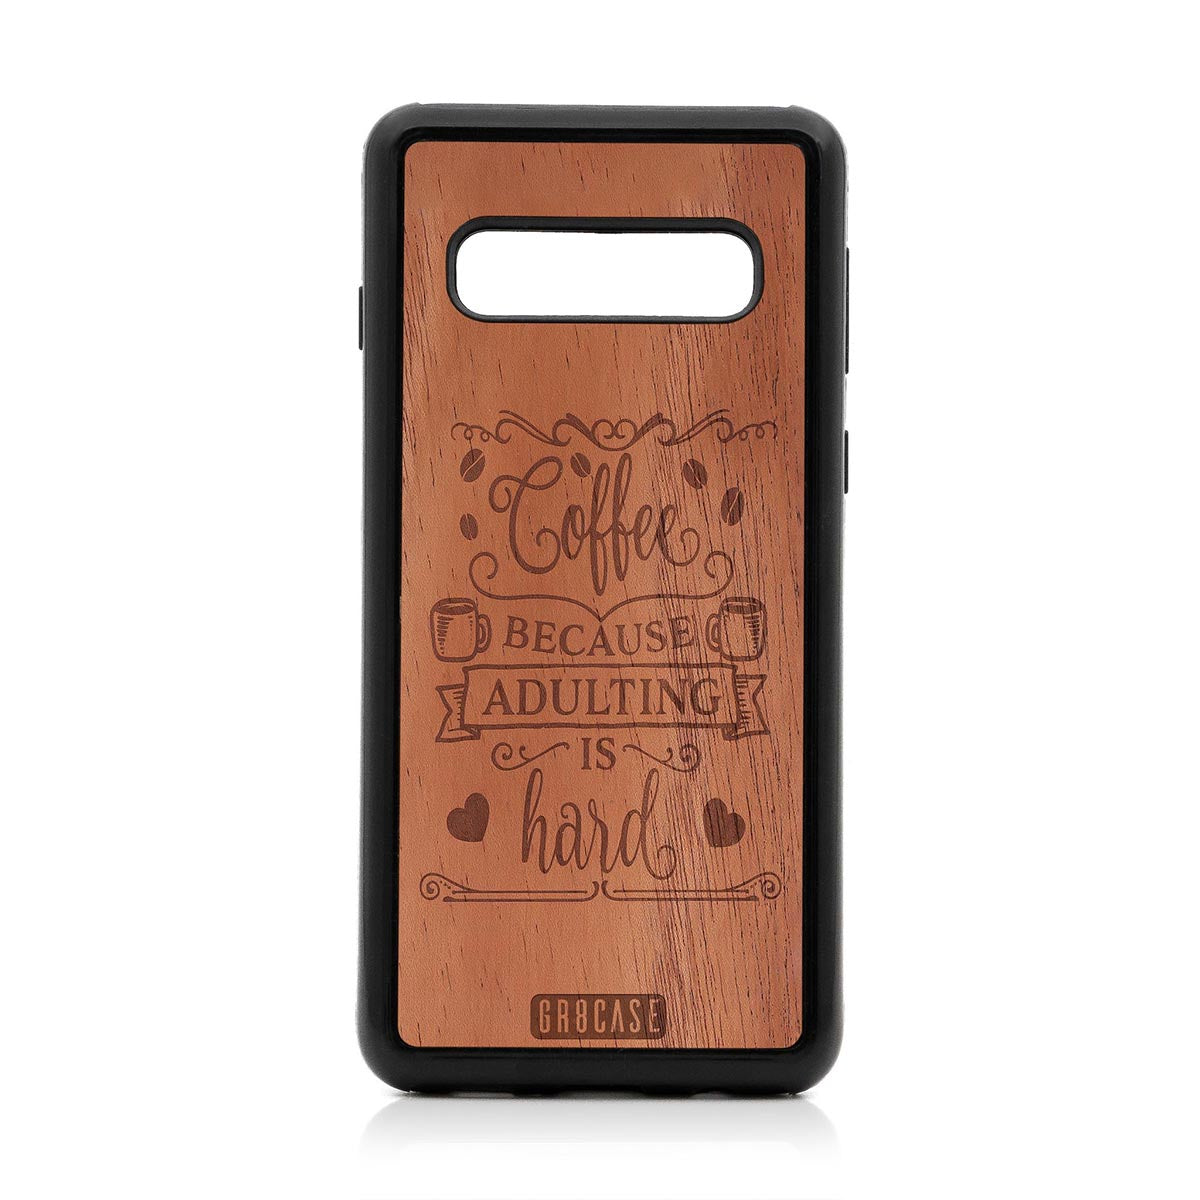 Coffee Because Adulting Is Hard Design Wood Case For Samsung Galaxy S10 by GR8CASE